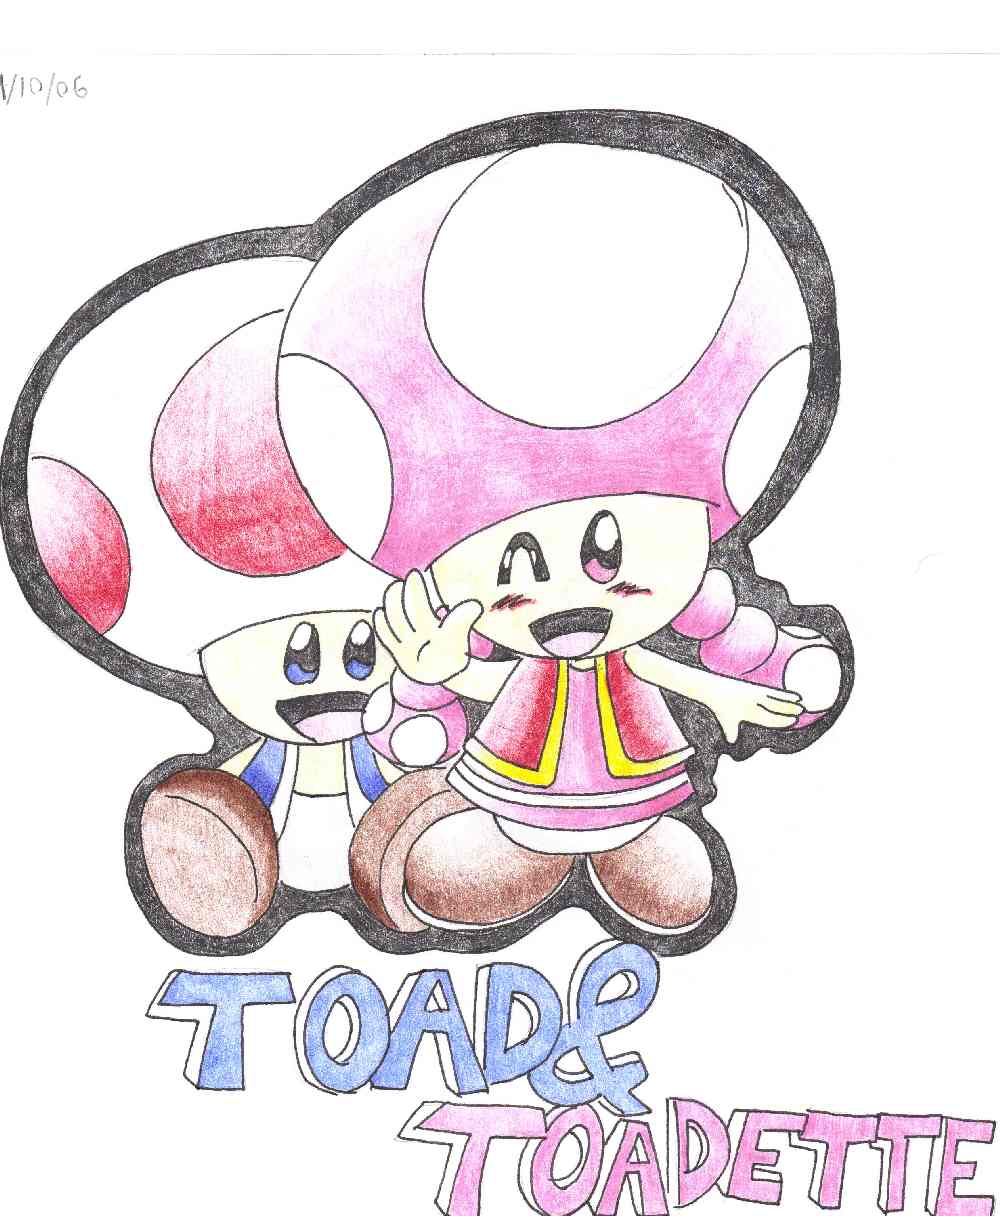 Toad &amp; Toadette (gift for sillysimeongurl) by ShadowLink_350